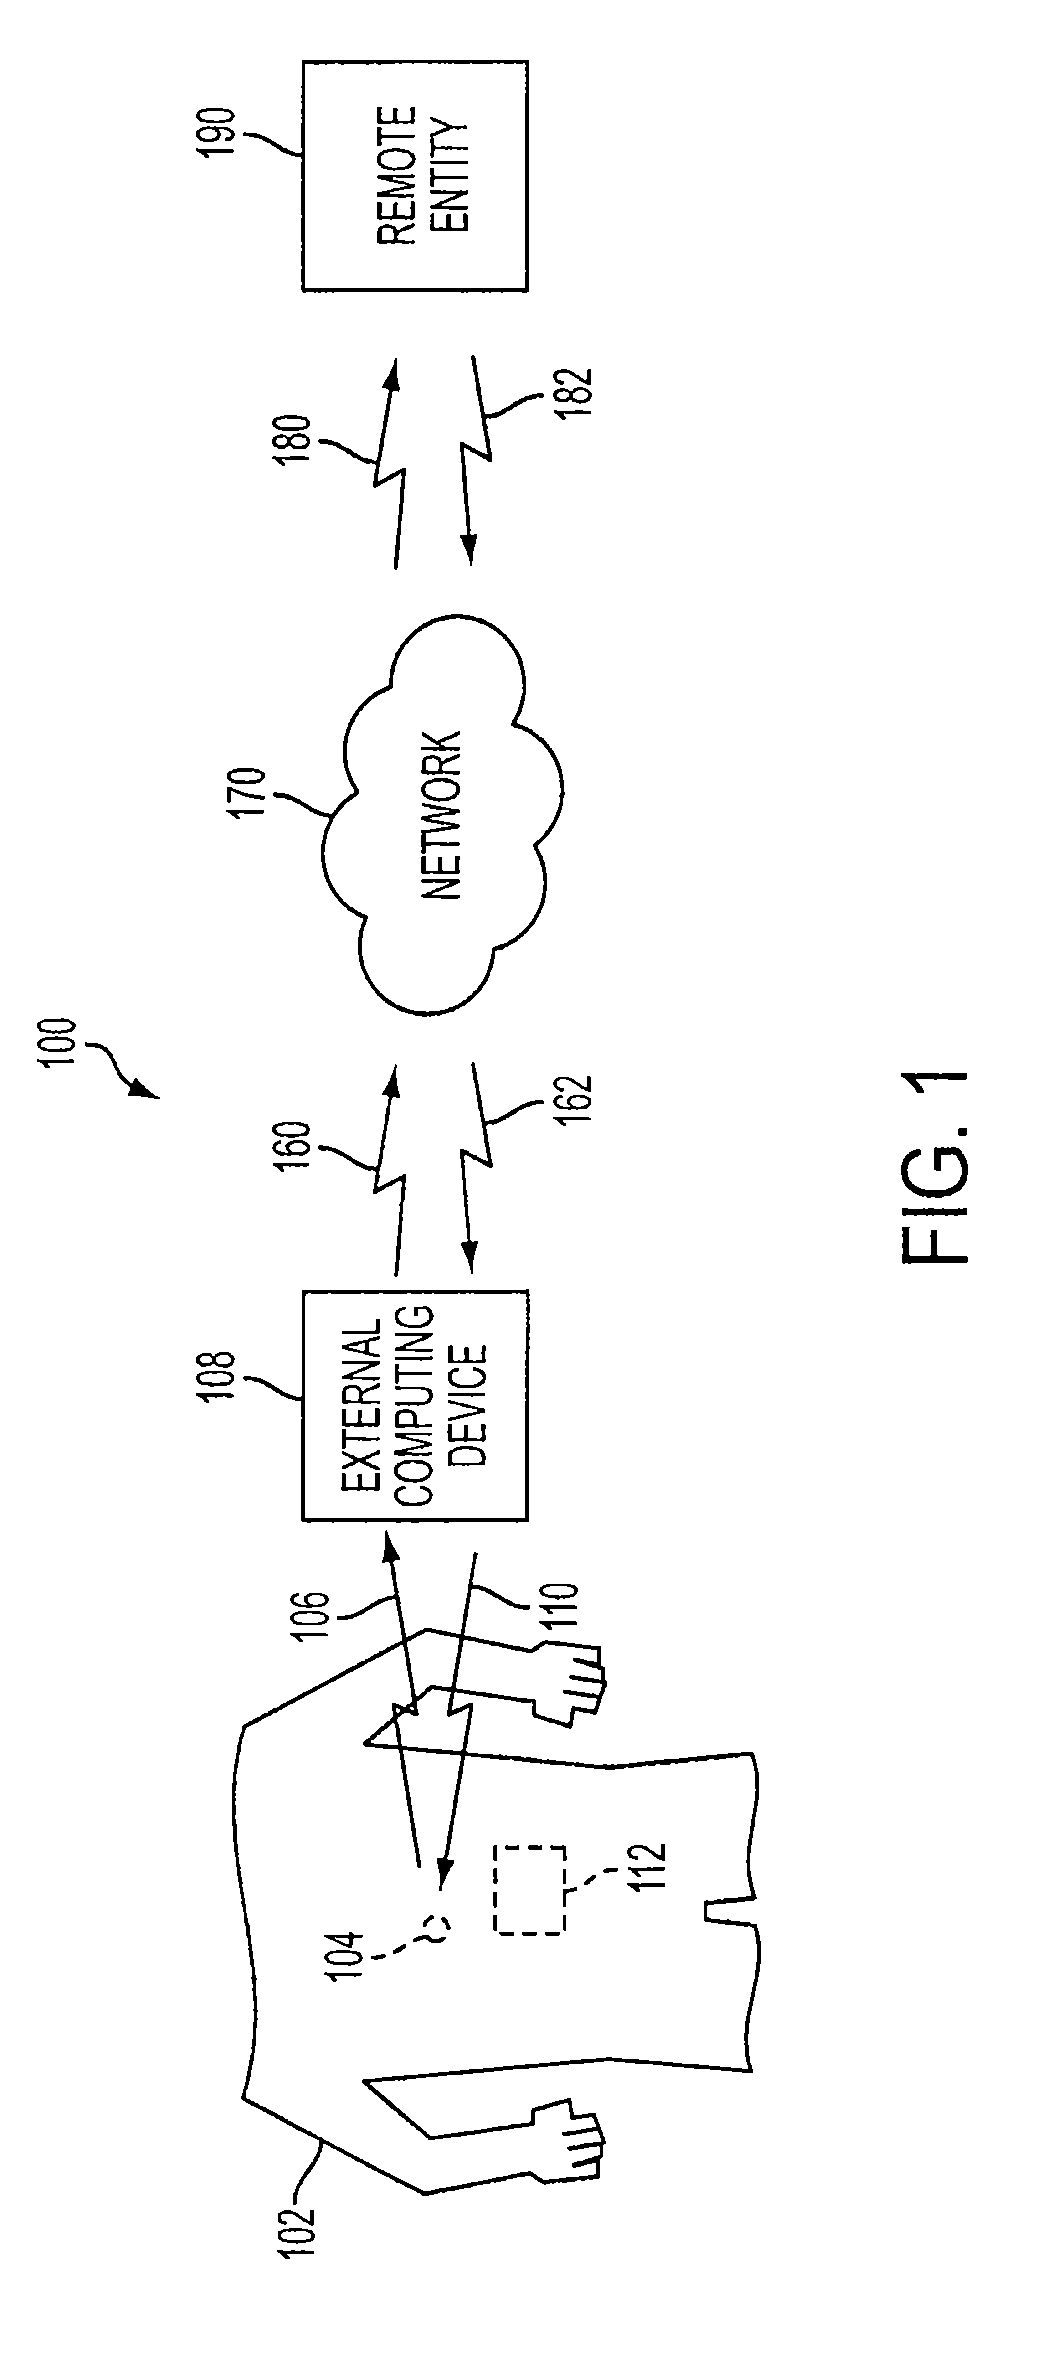 System and Method for Manufacturing a Swallowable Sensor Device